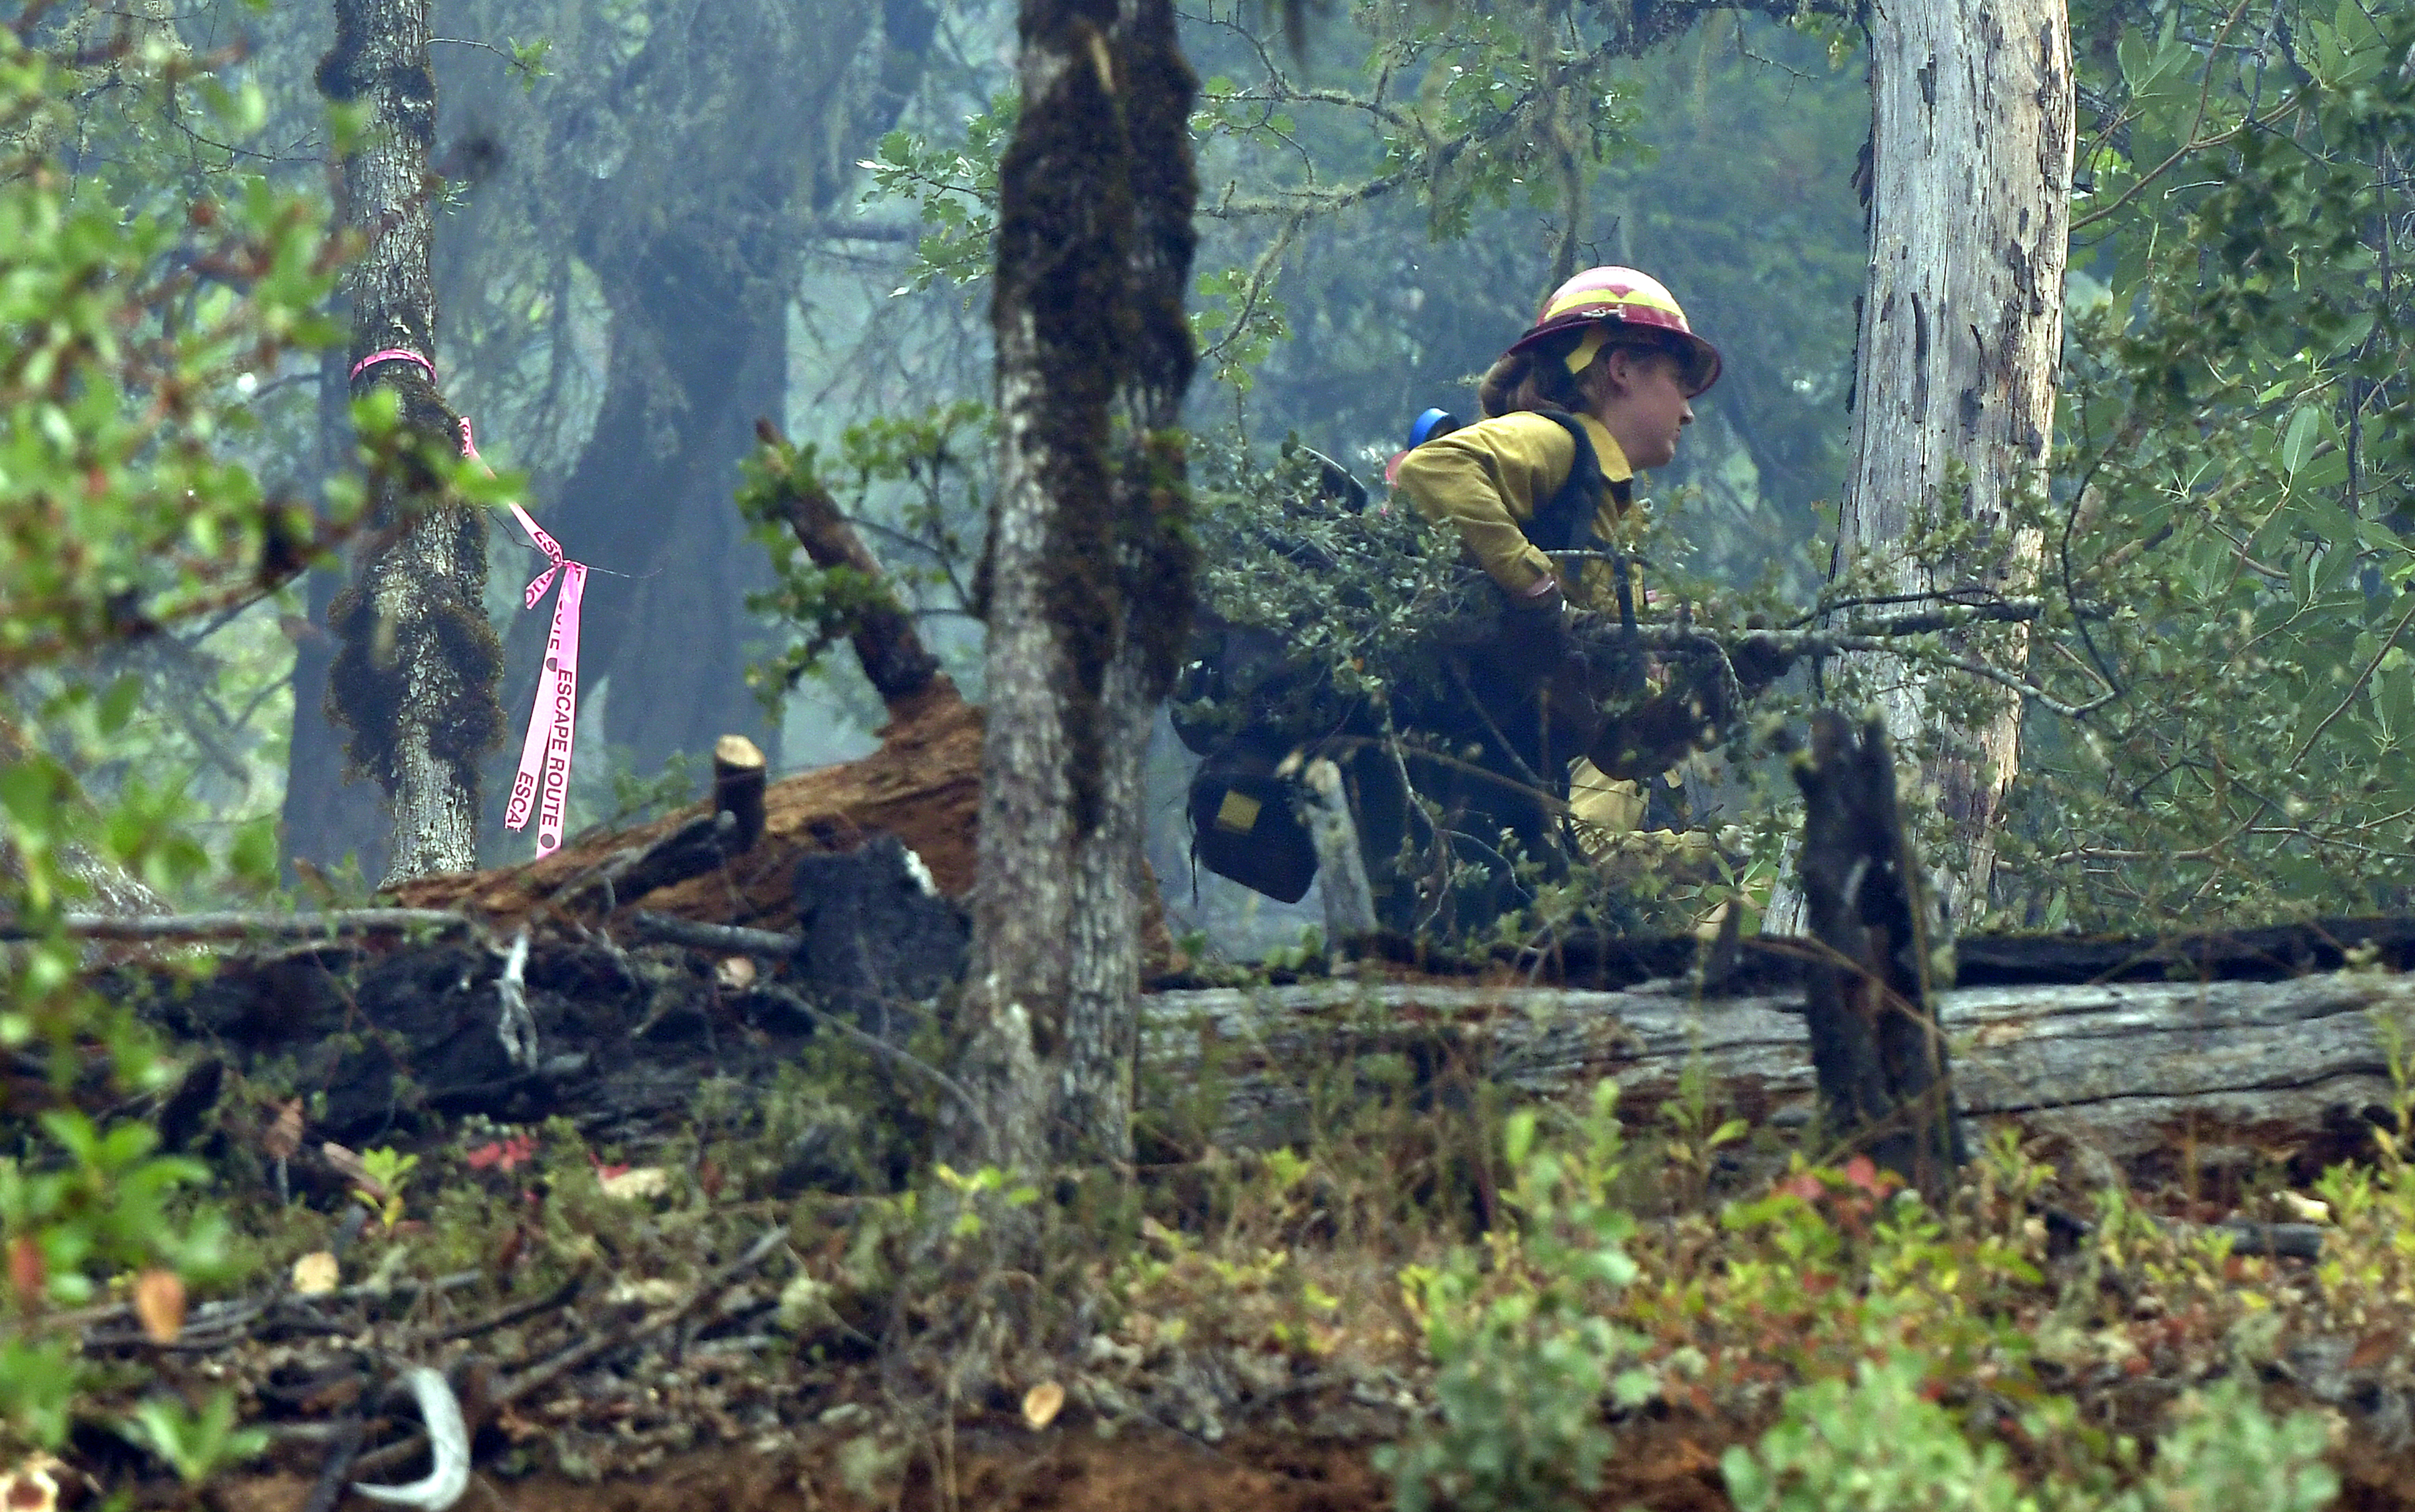 A firefighter clears brush near an escape route for firefighters at Rum Creek Fire in southwest Oregon on August 29, 2022.